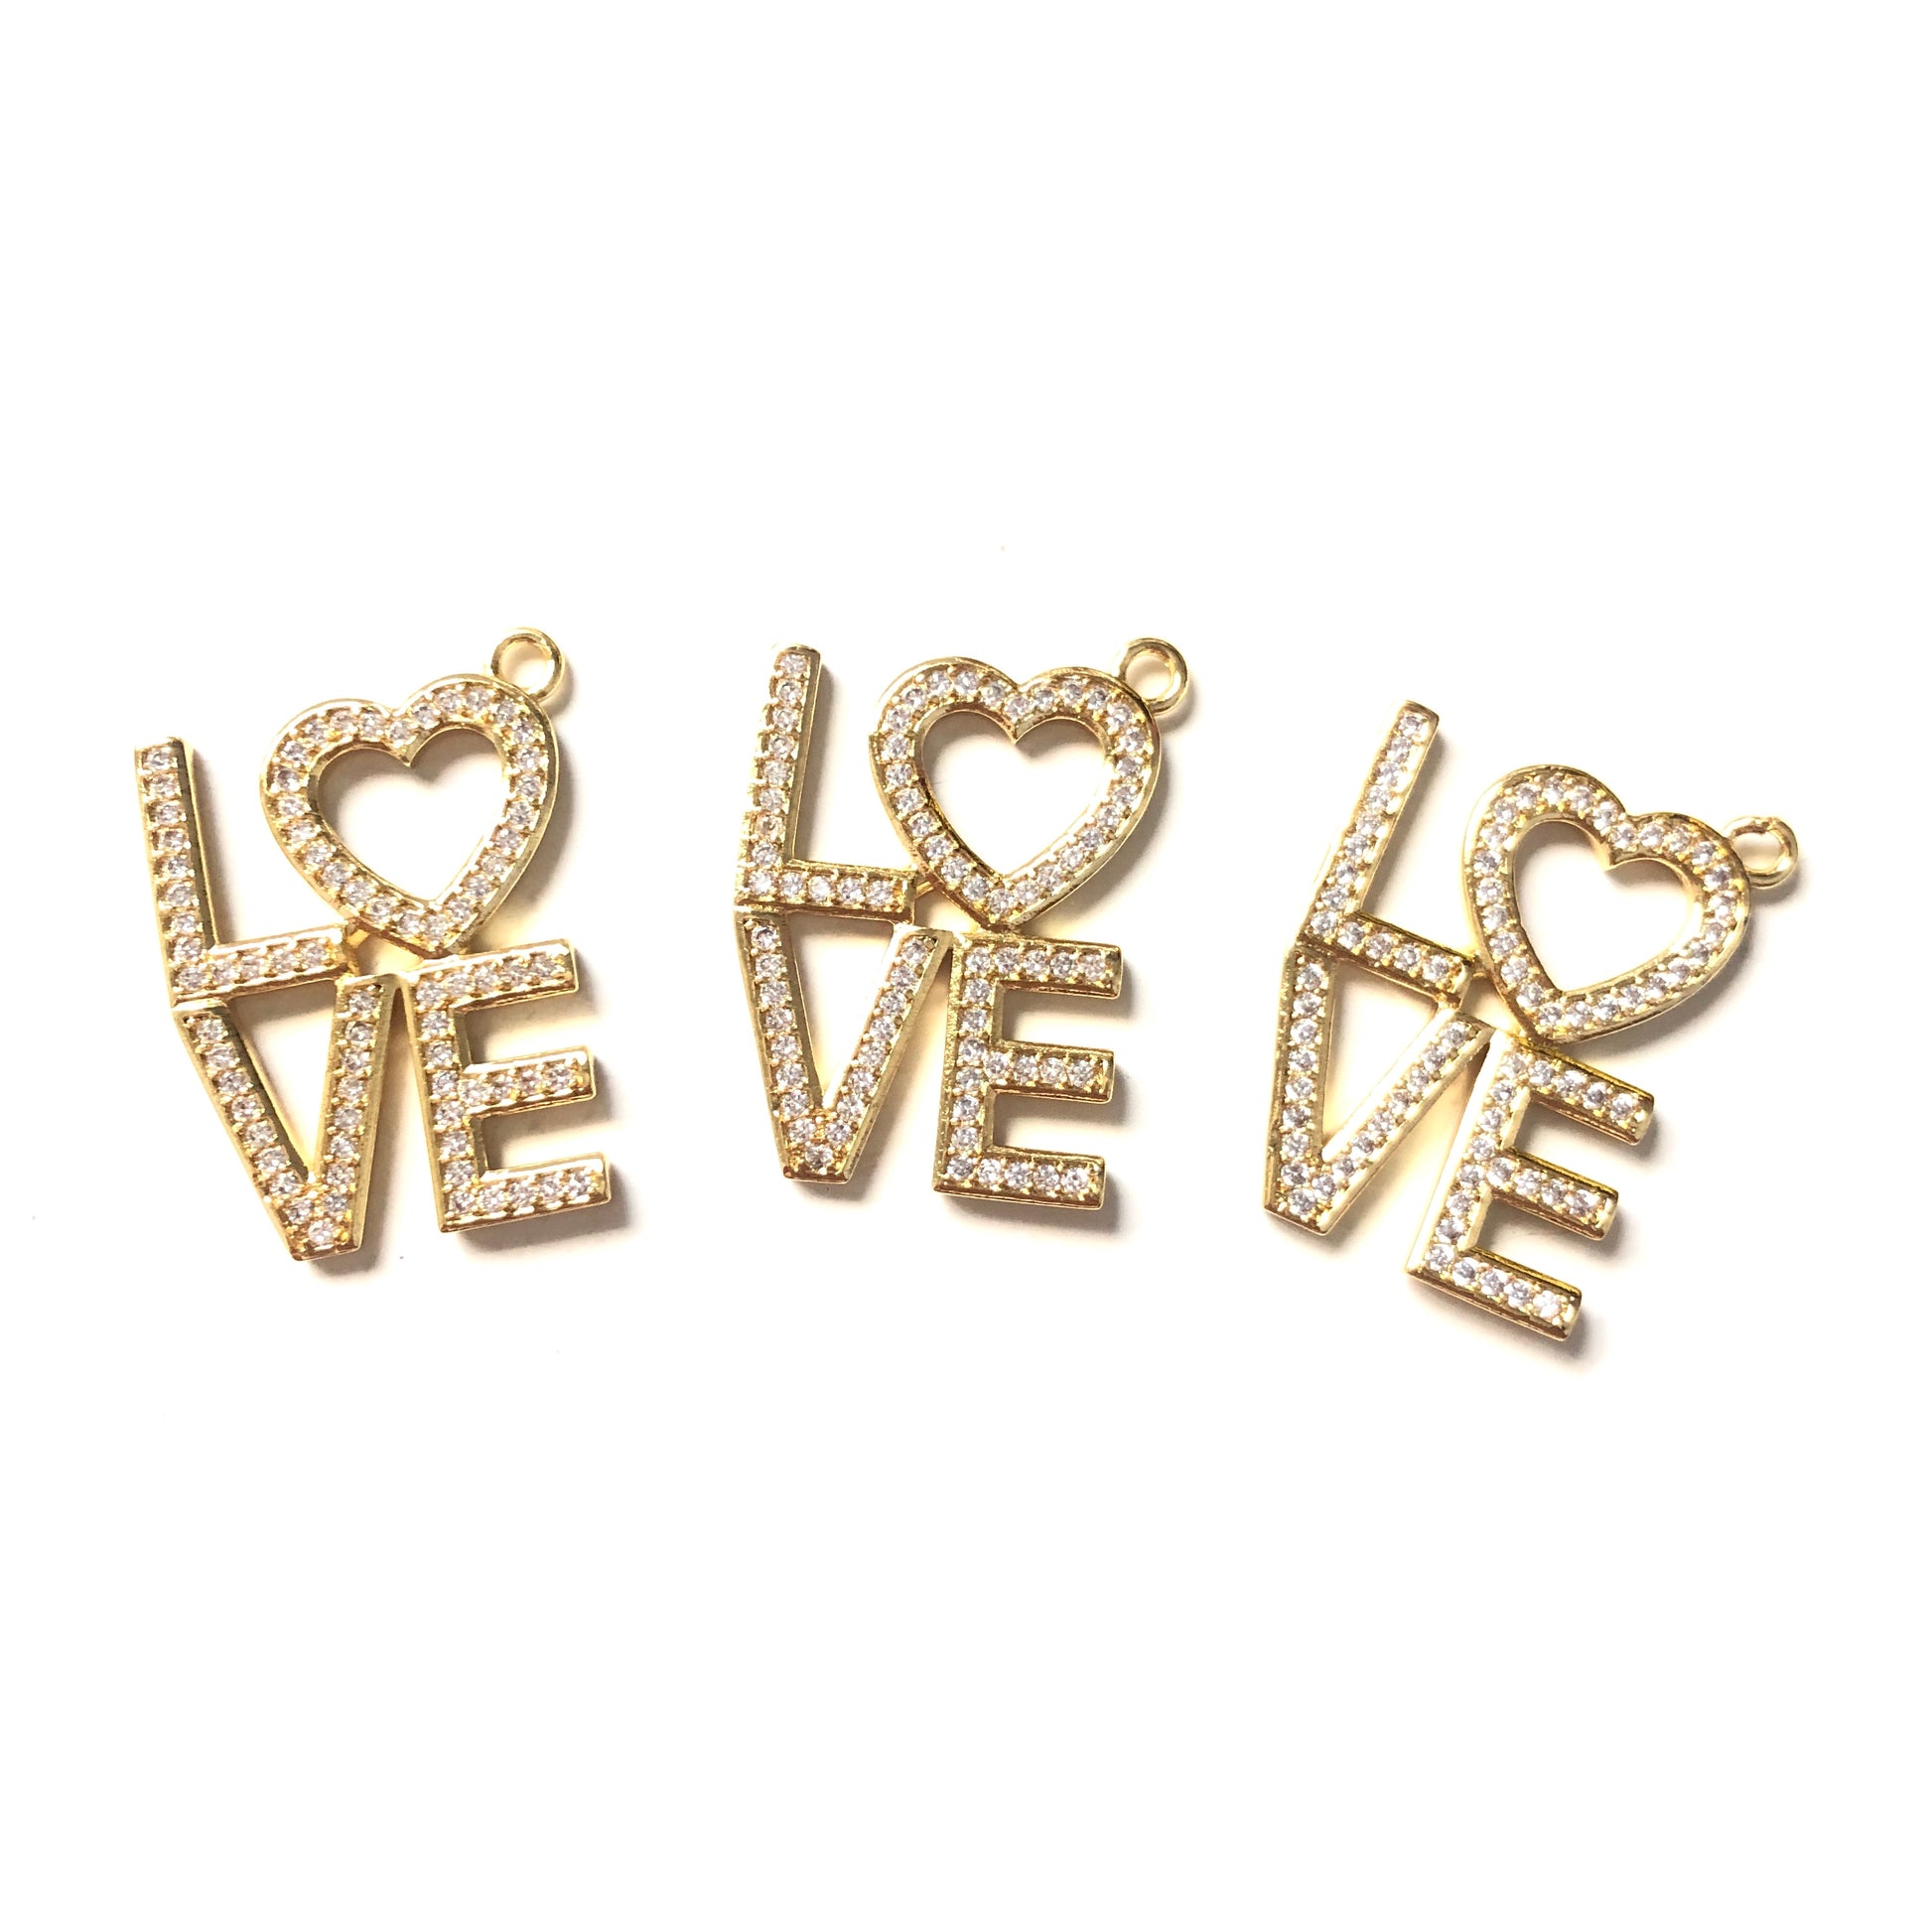 10pcs/lot 25*20mm CZ Paved LOVE Charms Gold CZ Paved Charms Love Letters Words & Quotes Charms Beads Beyond